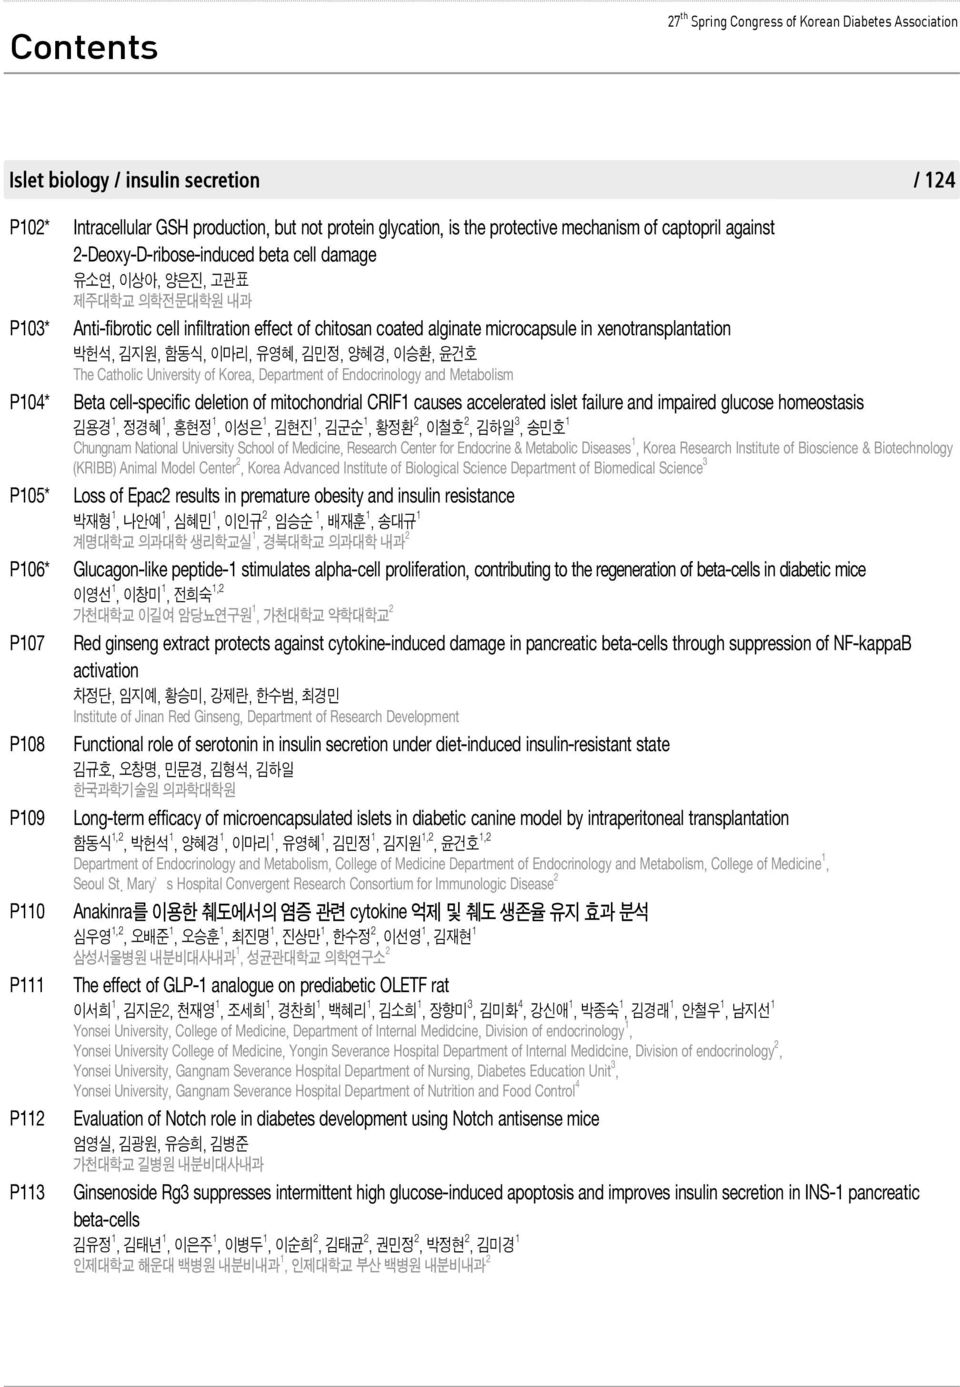 xenotransplantation 박헌석, 김지원, 함동식, 이마리, 유영혜, 김민정, 양혜경, 이승환, 윤건호 The Catholic University of Korea, Department of Endocrinology and Metabolism P104* Beta cell-specific deletion of mitochondrial CRIF1